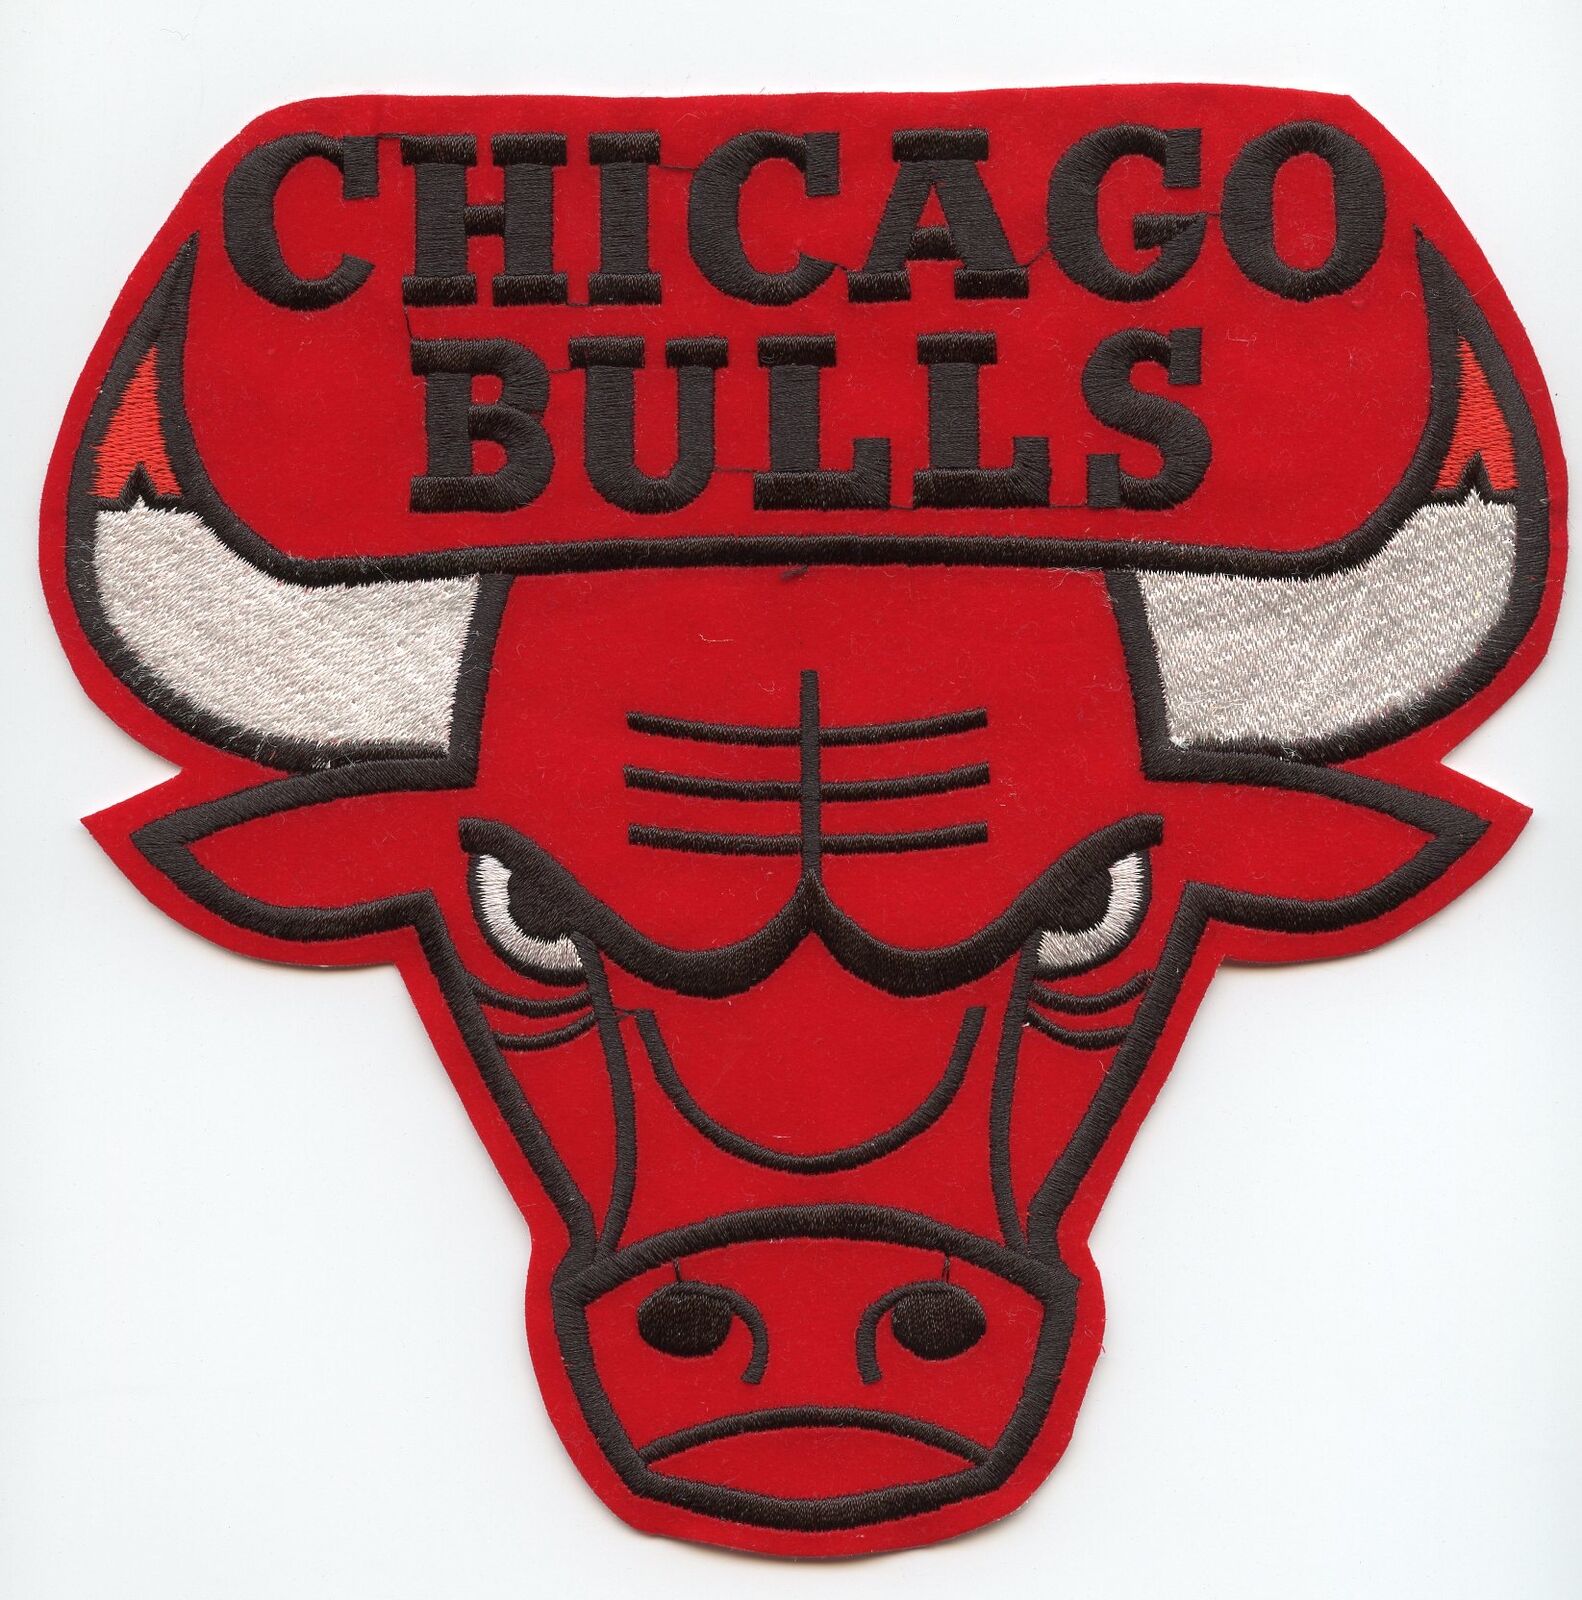 NBA CHICAGO BULLS Logo Emblem Embroidered Suede Patch 7.5" x 8" Image 1